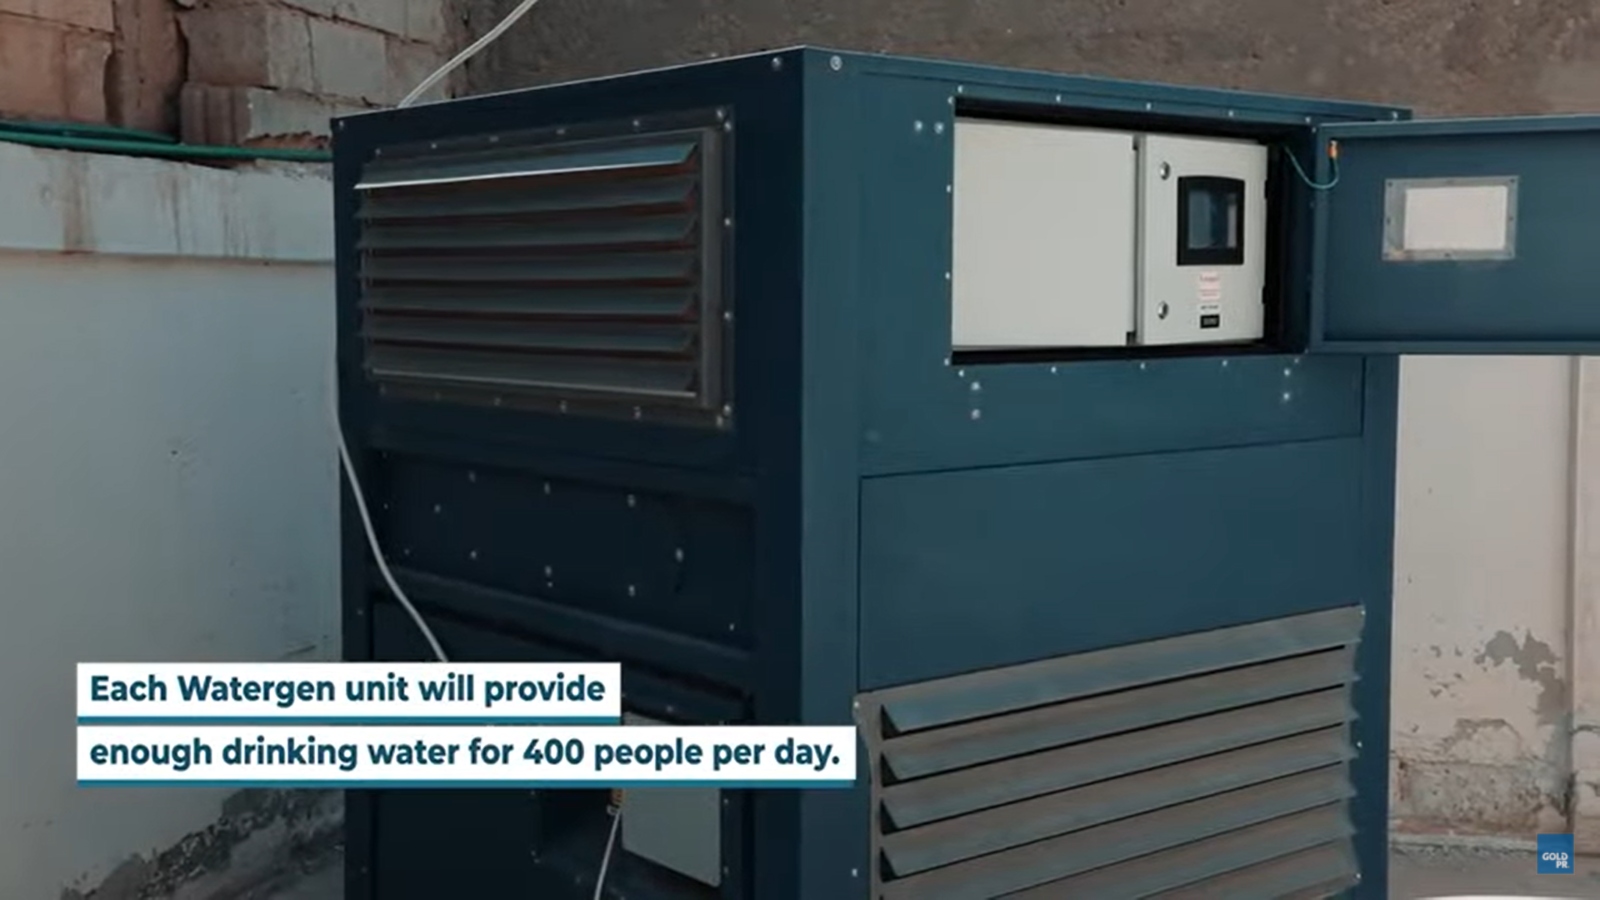 Israel’s Watergen makes water from air for Syrian refugees